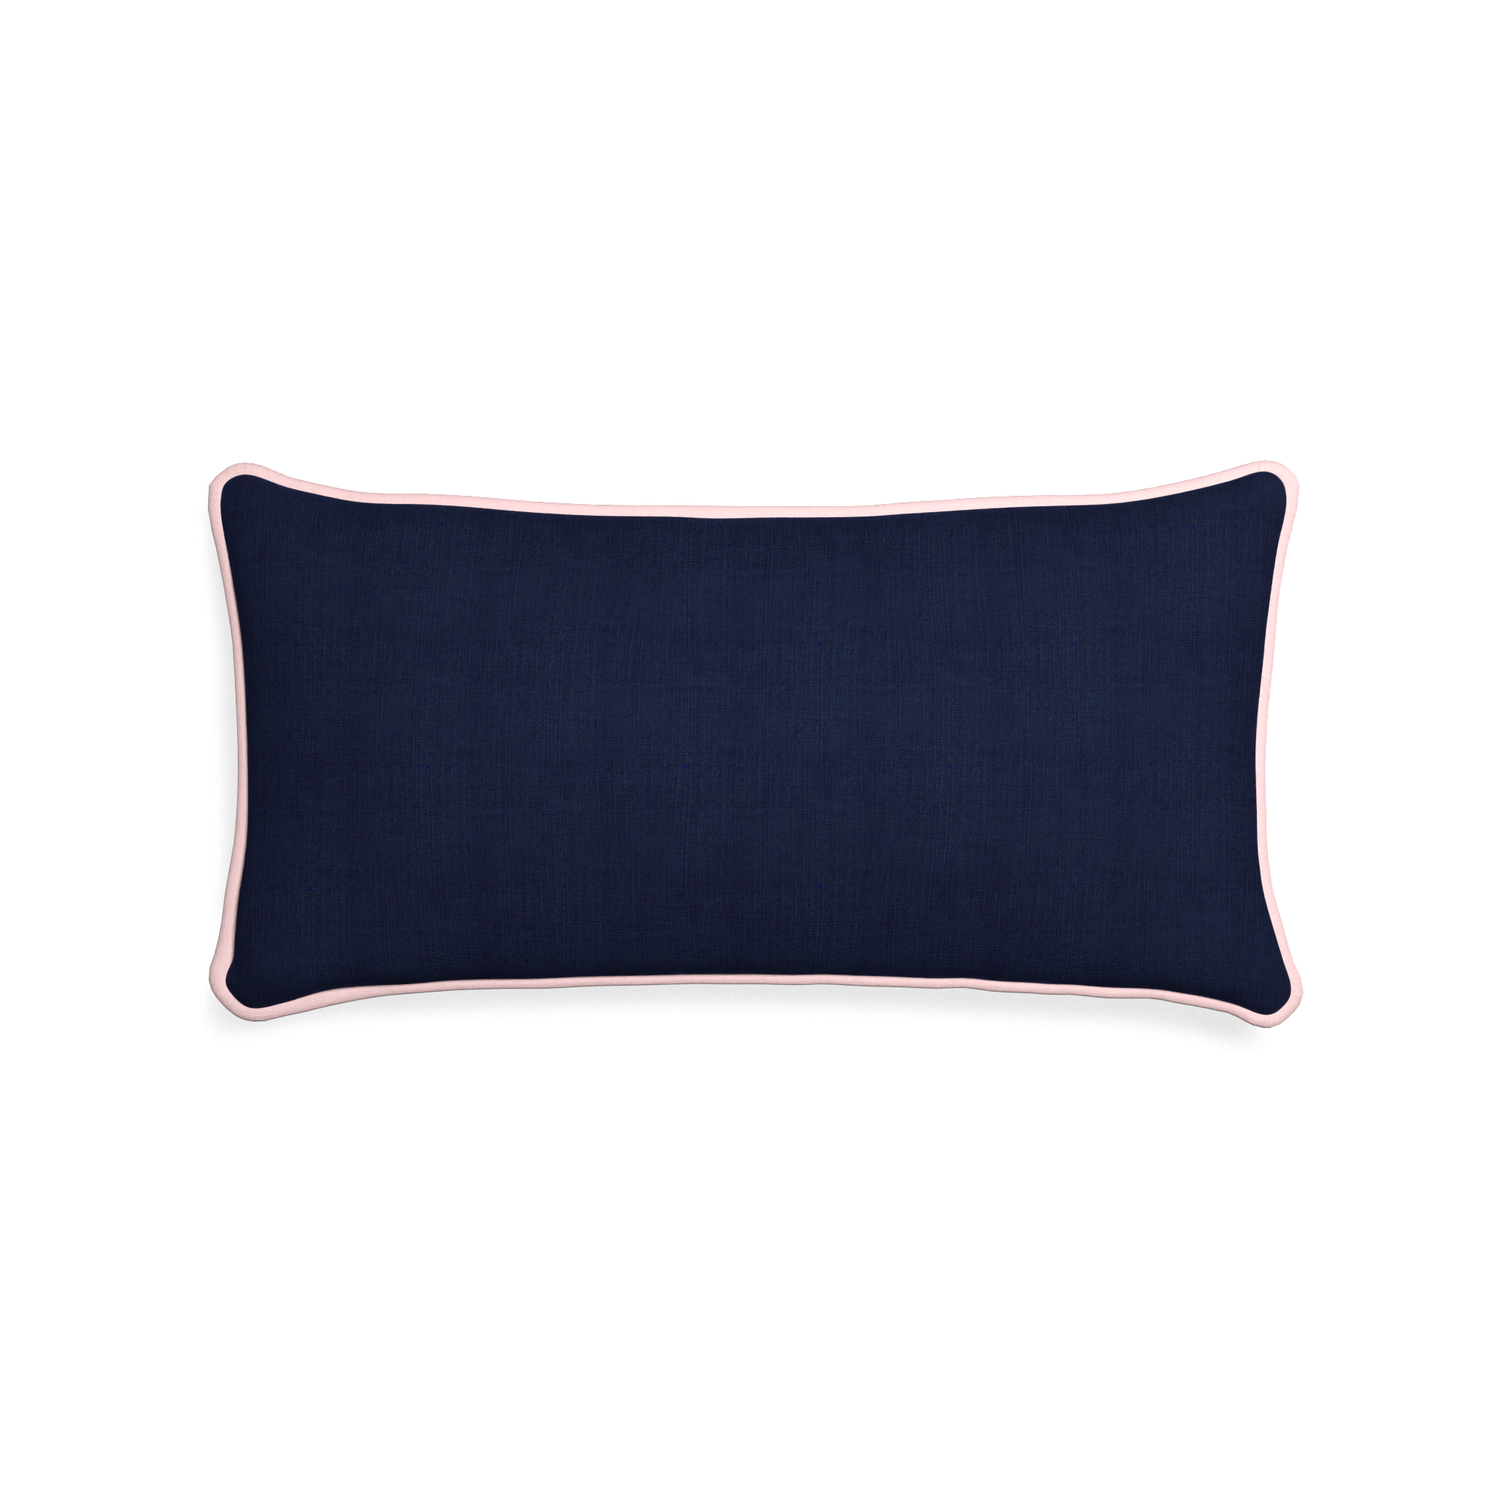 Midi-lumbar midnight custom navy bluepillow with petal piping on white background